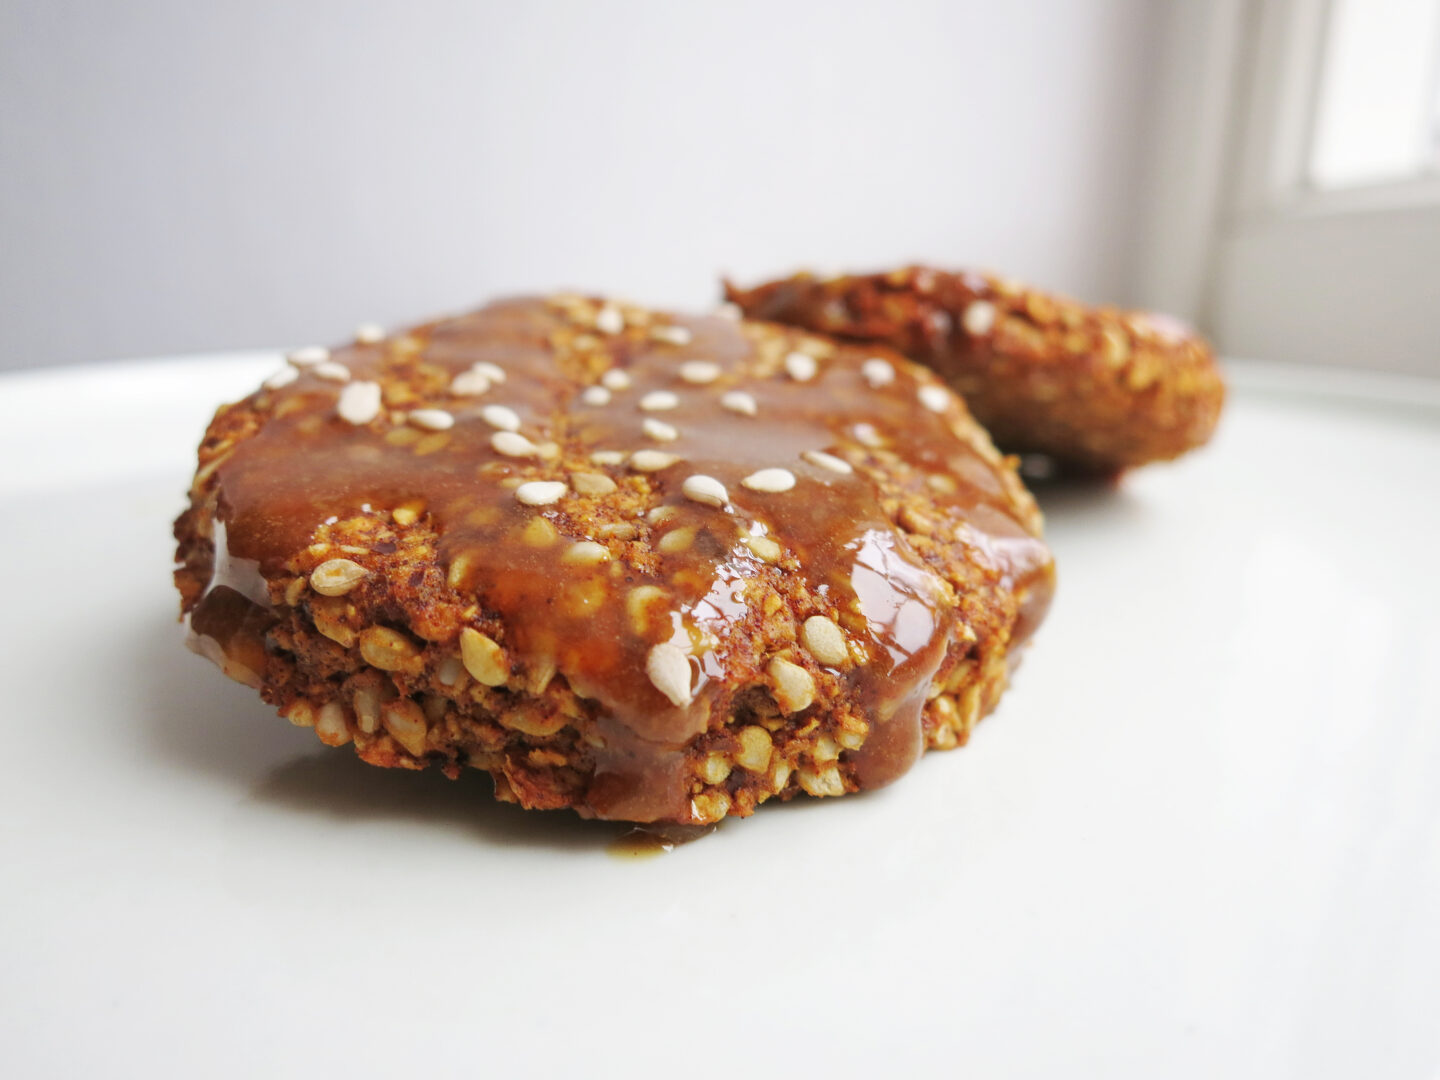 Sesame cookies with a tahini caramel drizzle